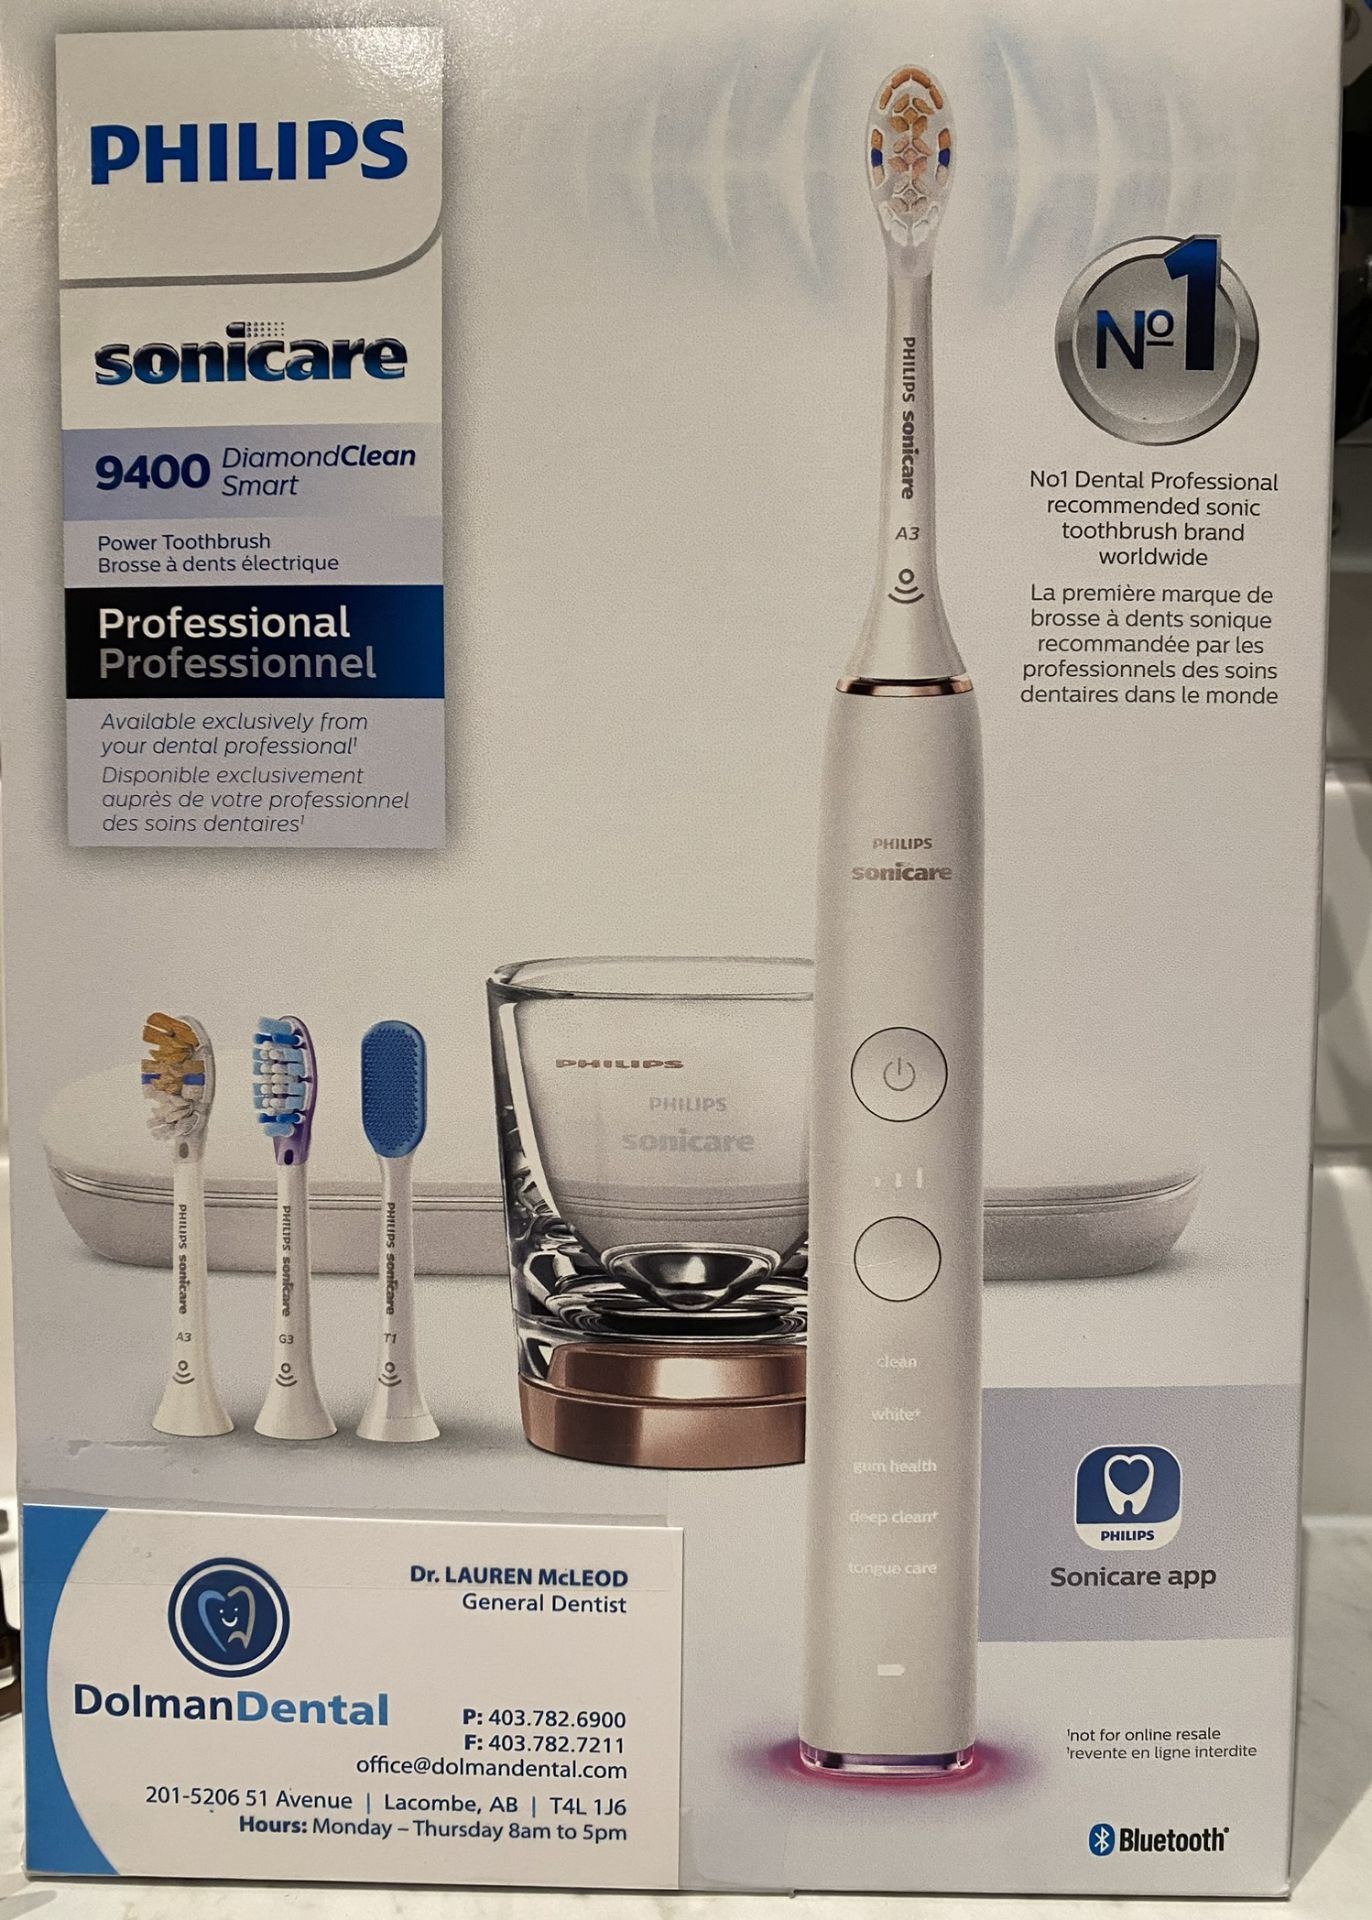 Philips Sonicare 9400 Sonic Toothbrush Donated By: Dolman Dental